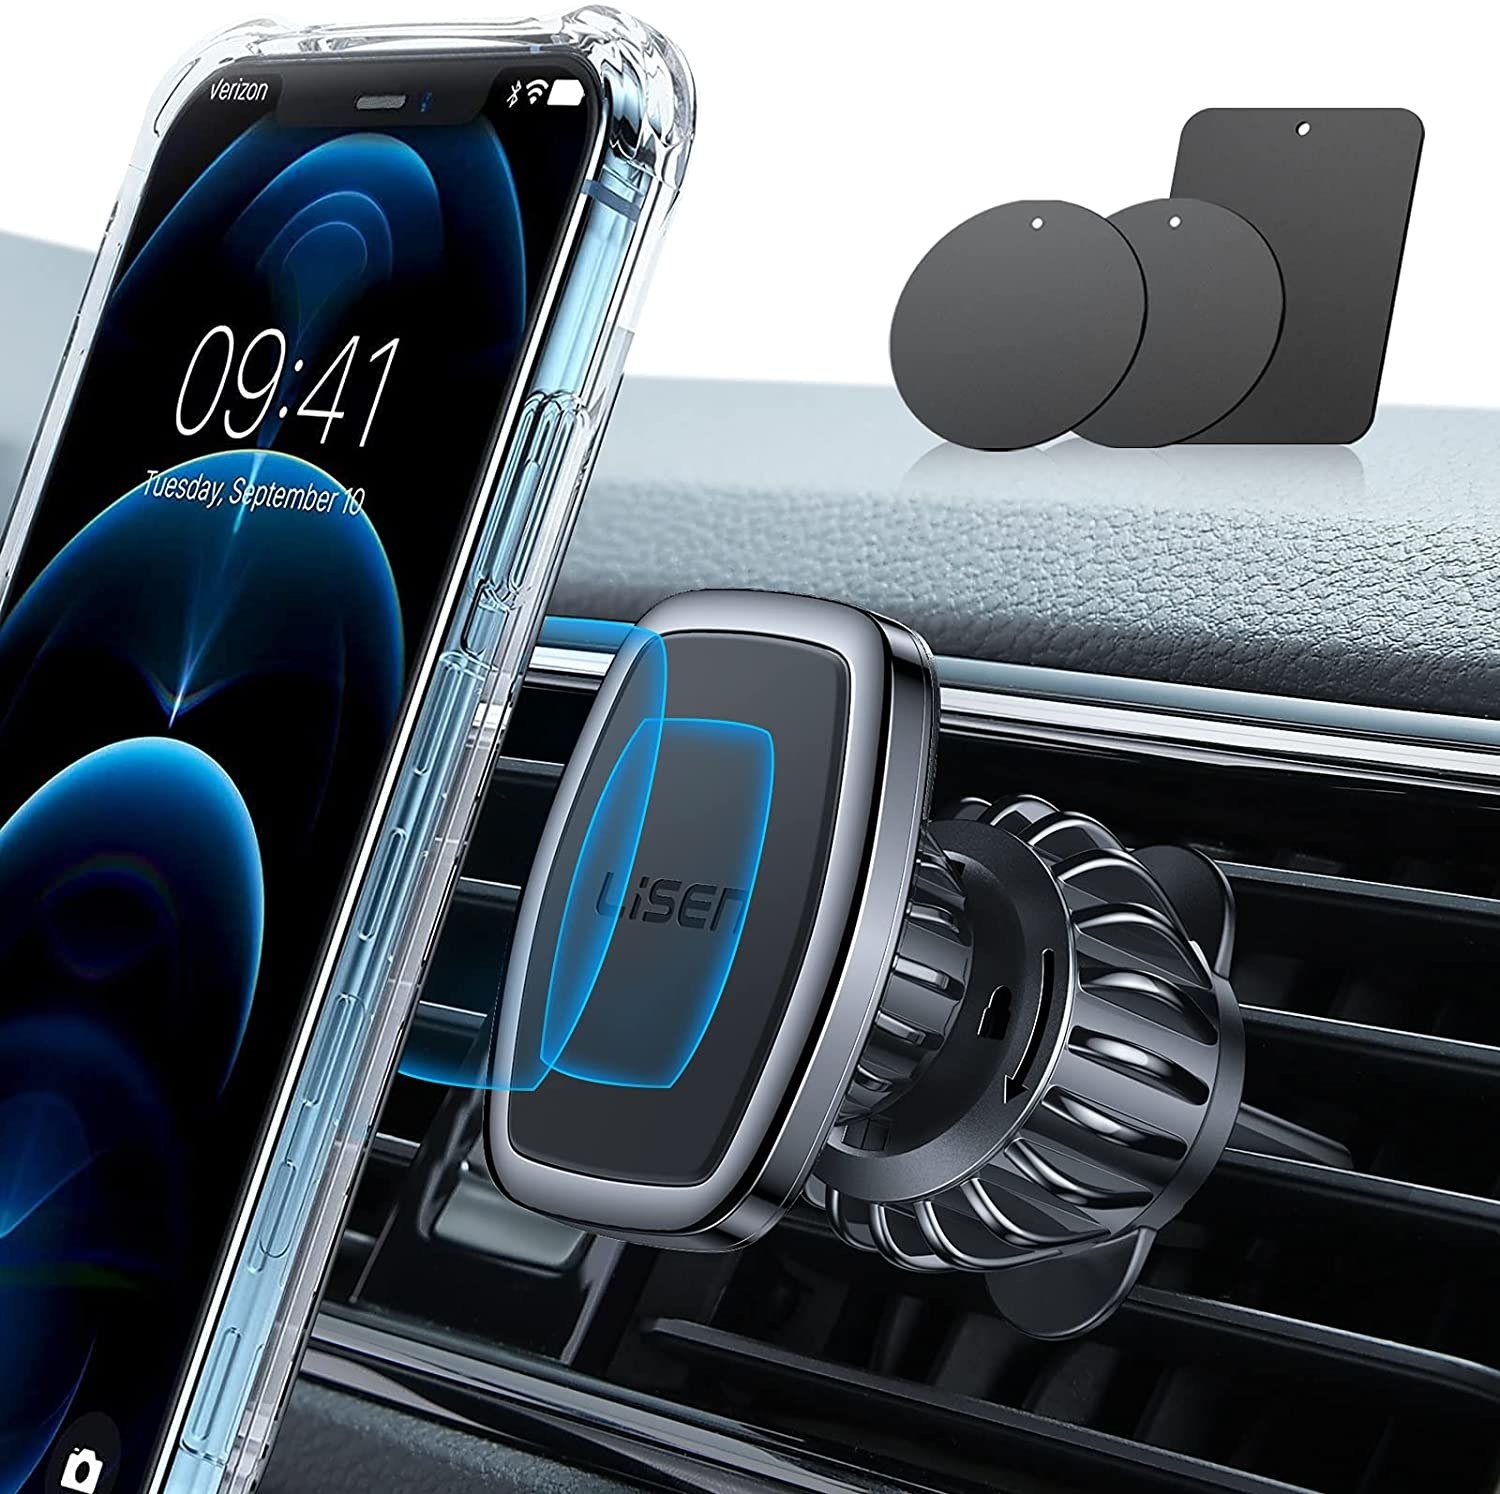 A phone hovering over the mount showing how it attaches using magnets and the mount clipped onto the air vents of a car